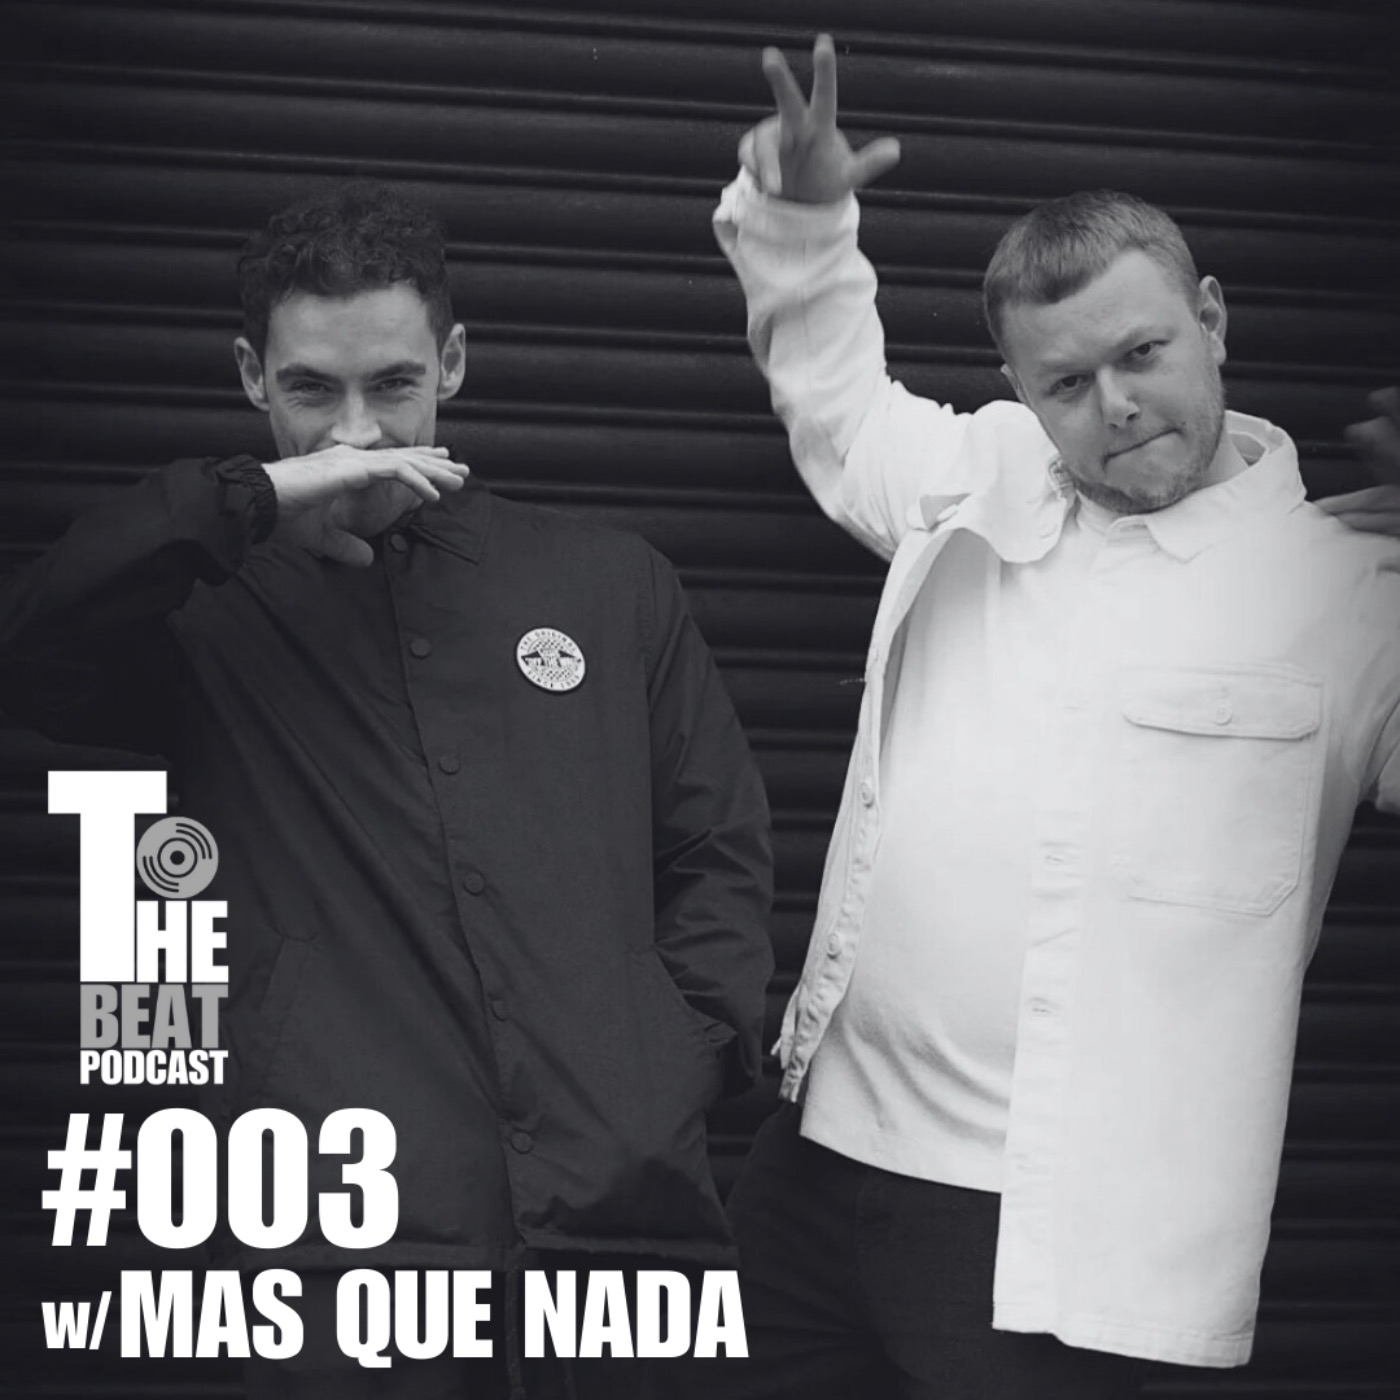 #003 MAS QUE NADA | From running events in a pub to hosting a stage at Glastonbury